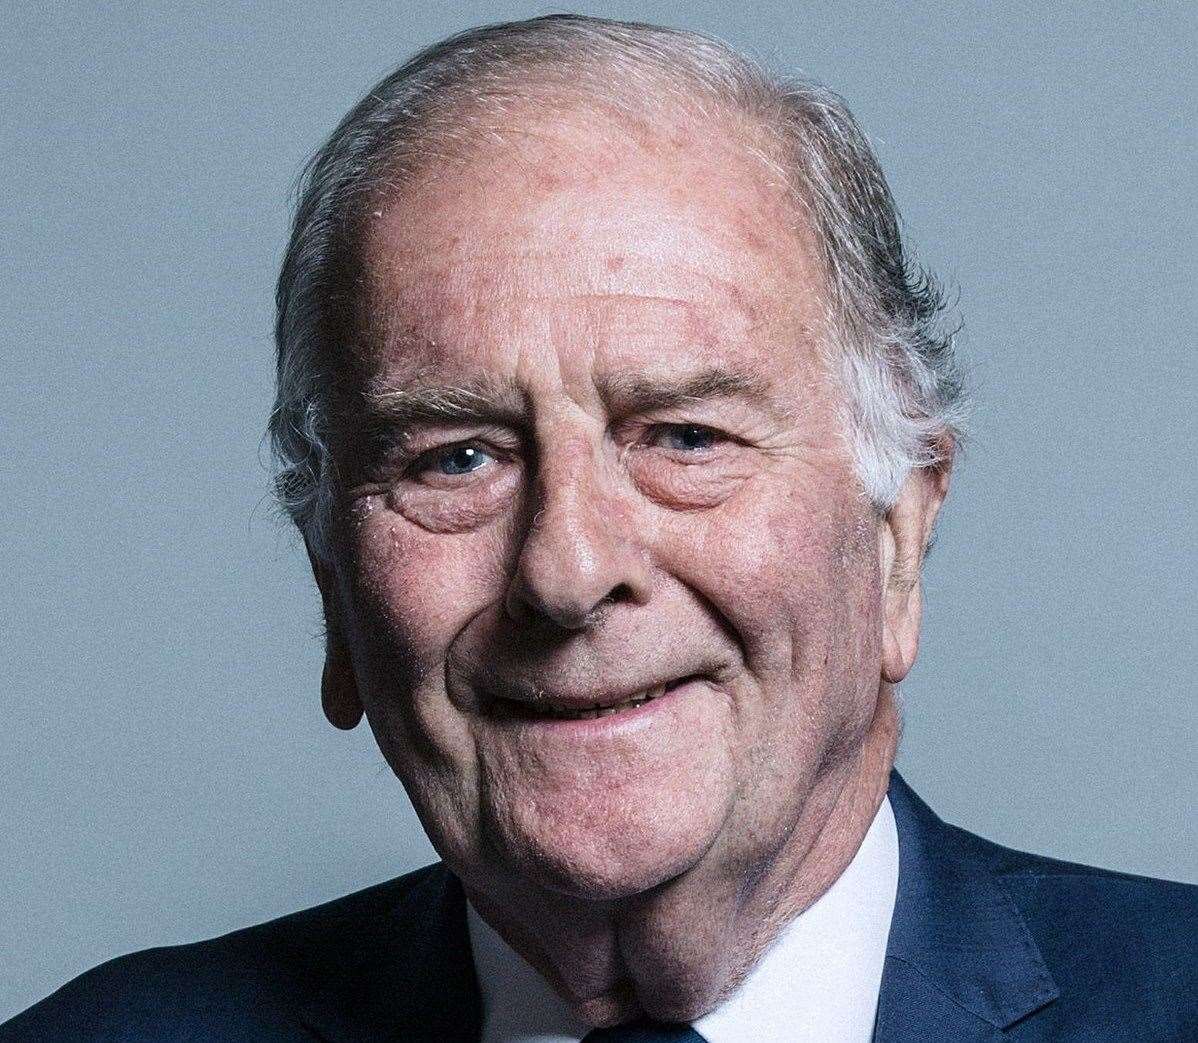 Sir Roger Gale said he would resign the Tory whip if Boris Johnson returns to power